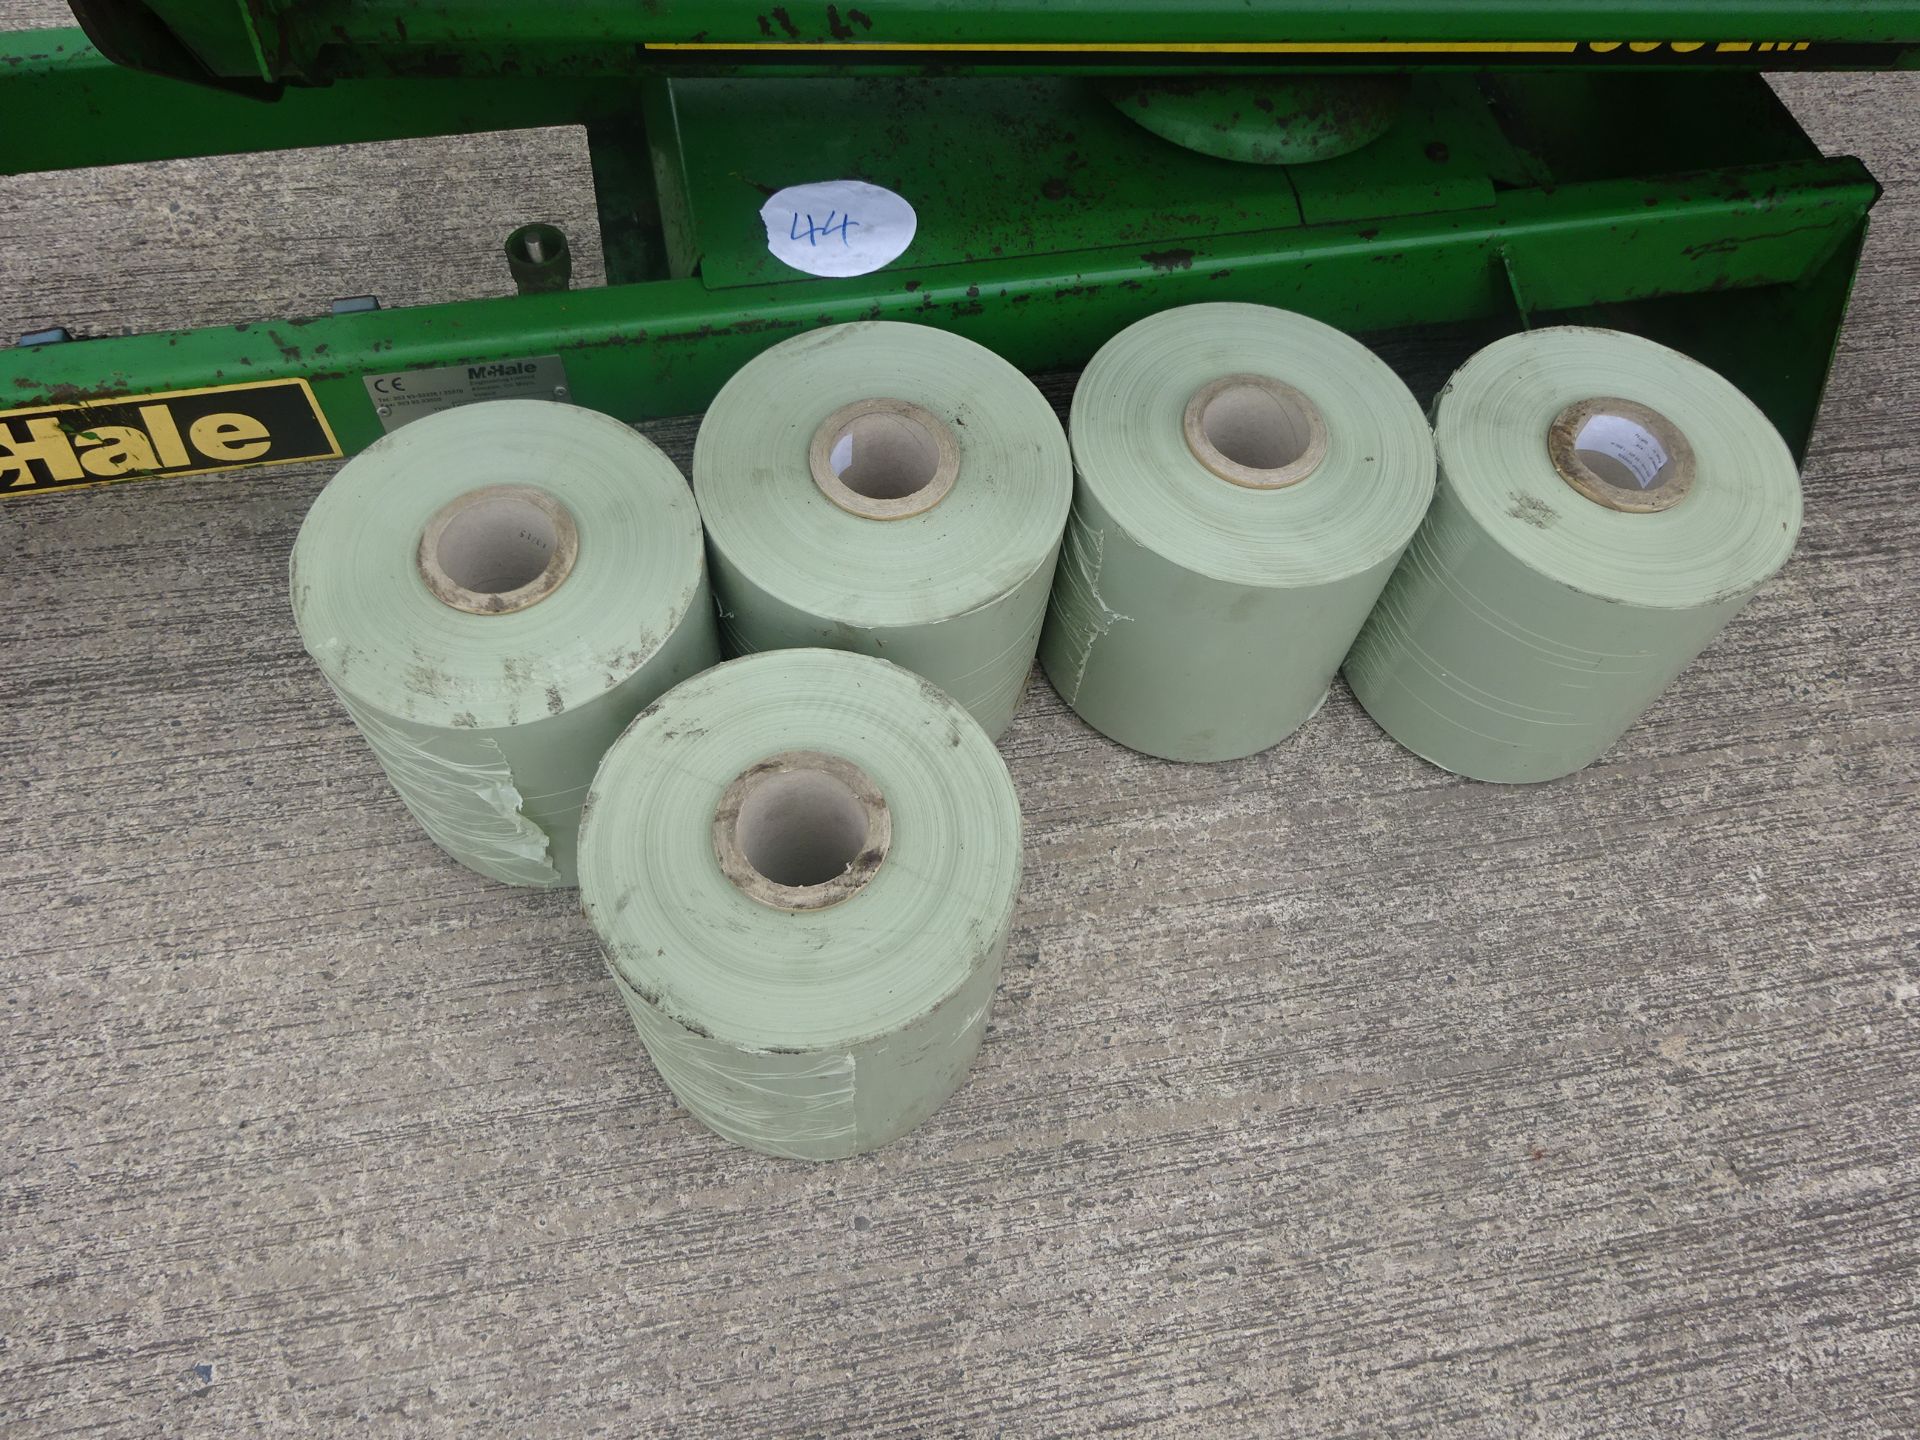 MCHALE CONVENTIONAL BALE WRAPPER - Image 2 of 4